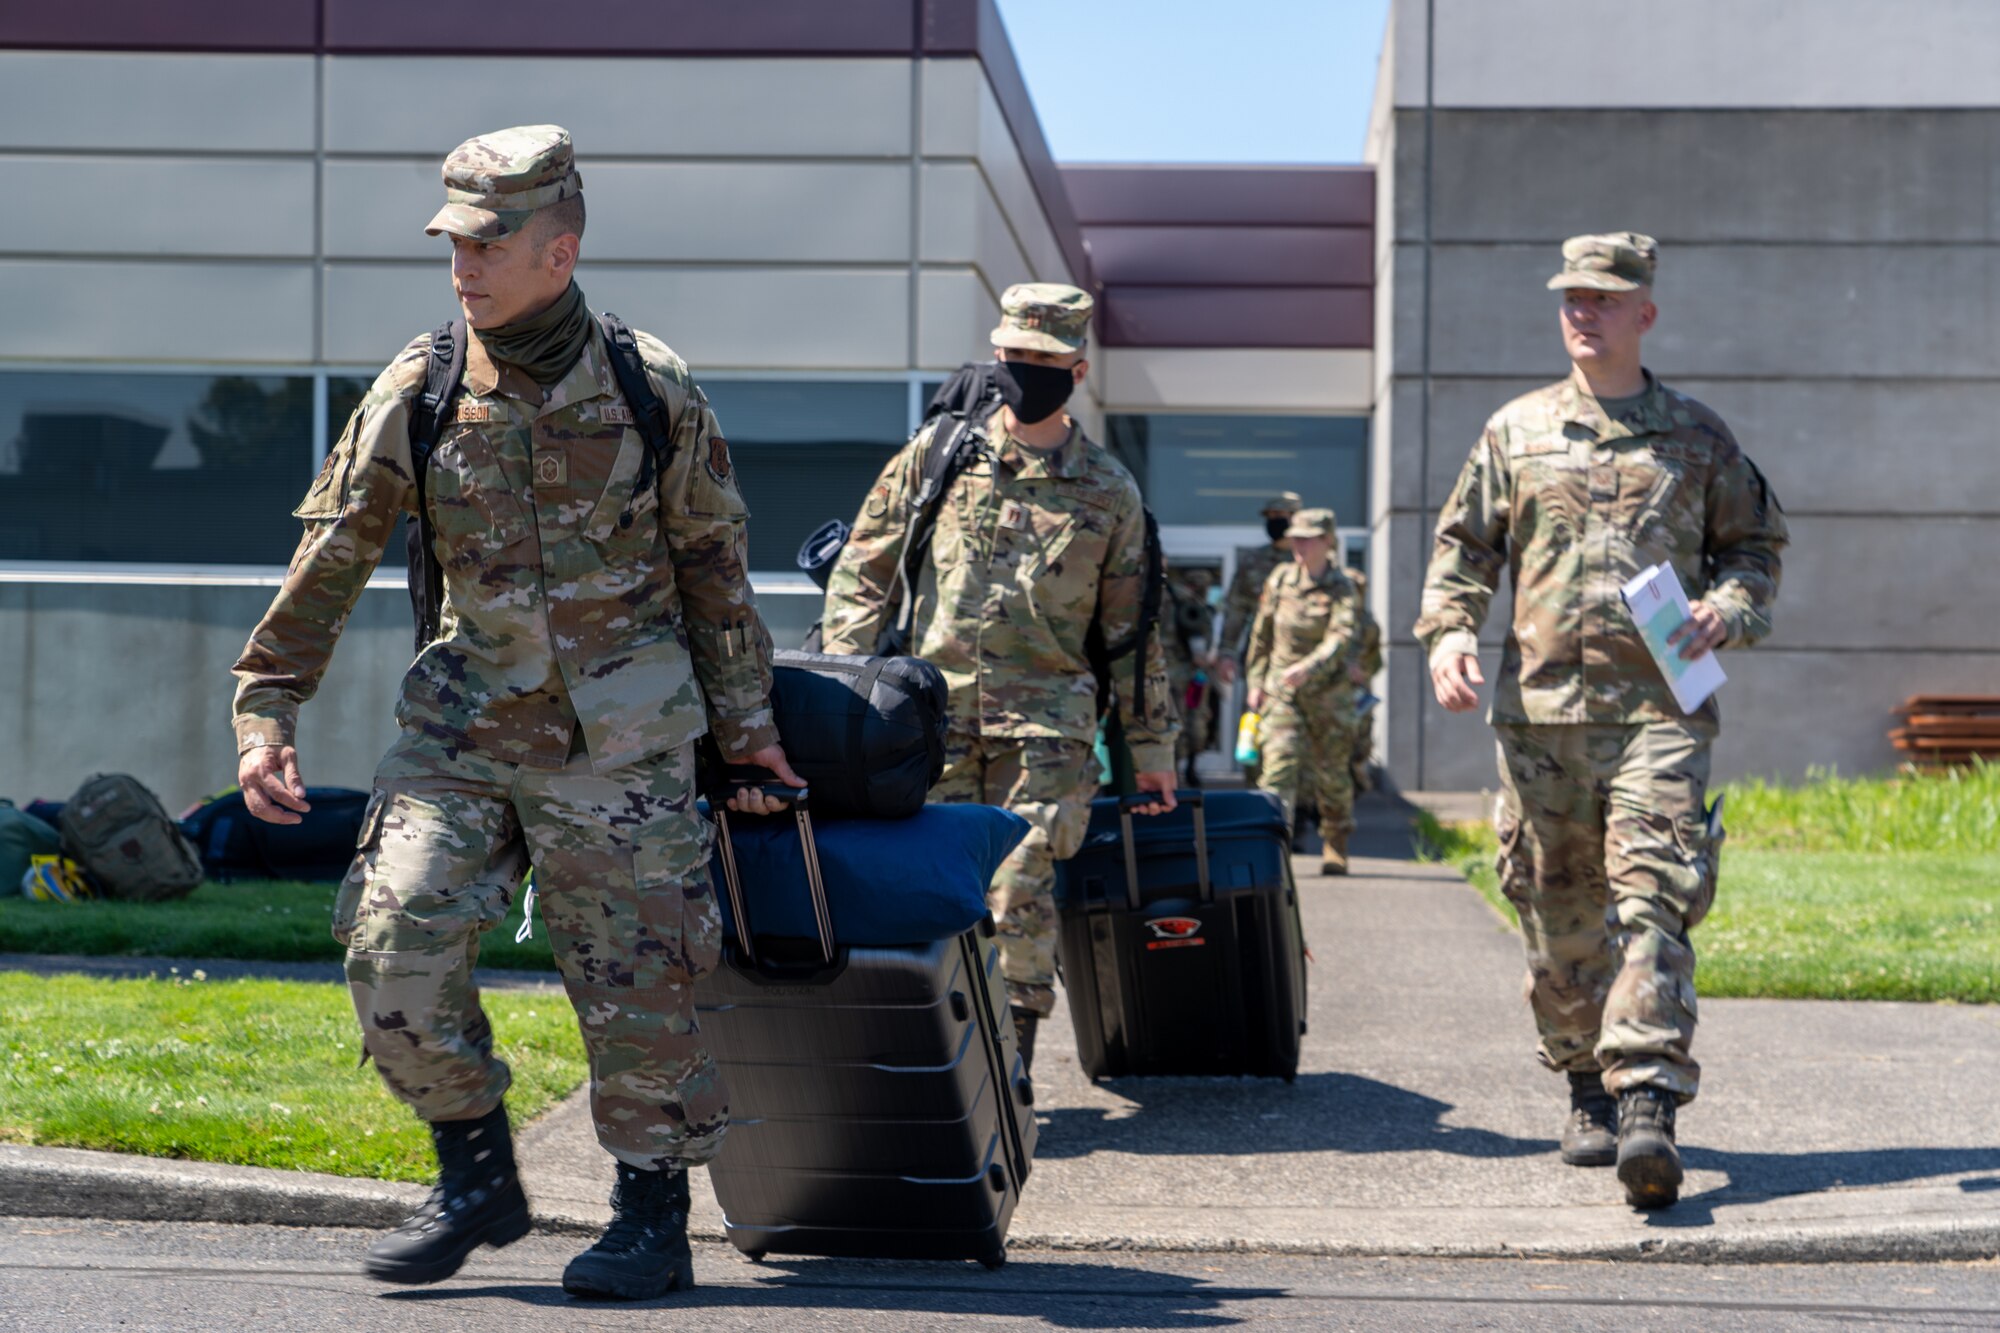 Senior Master Sgt. Joshua Pousson, 142nd Maintenance Group, leads a group of Oregon National Guard Airmen departing Portland Air National Guard Base in support of OPLAN Smokey. OPLAN Smokey requires Airmen to be ready at a moment’s notice to help with statewide wildfire relief efforts.